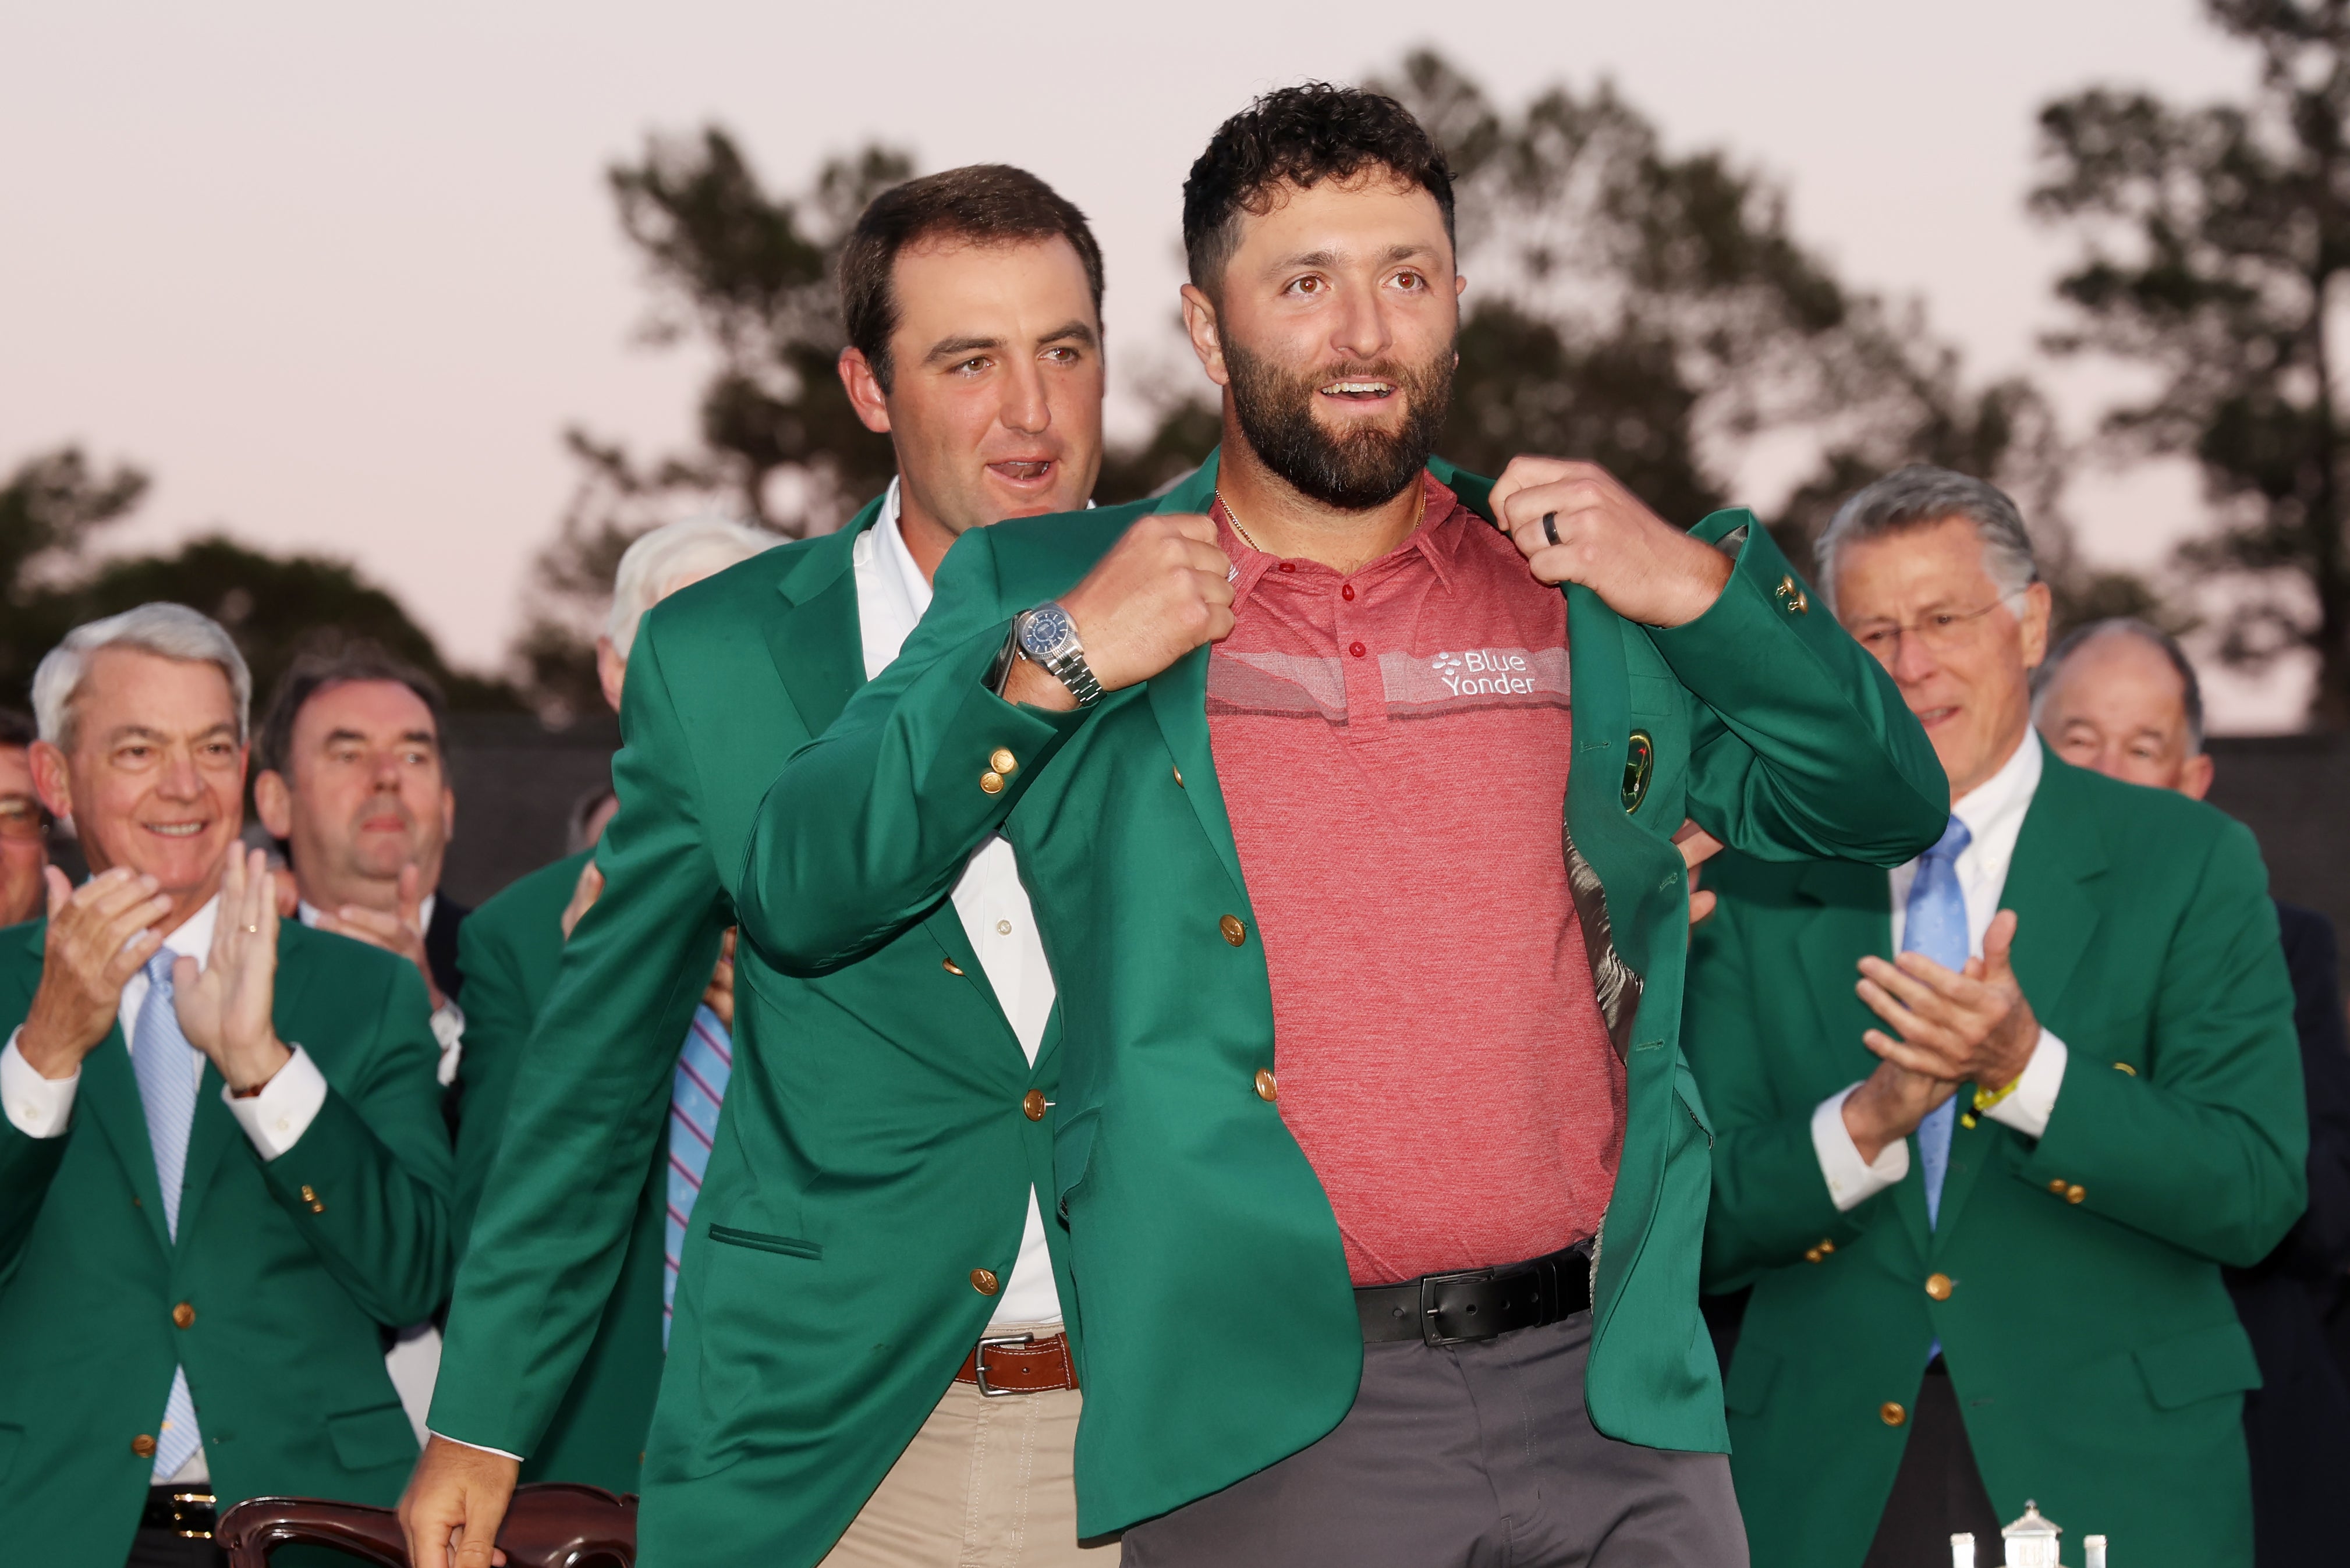 The healing power of the green jacket may be able to unite a divided sport